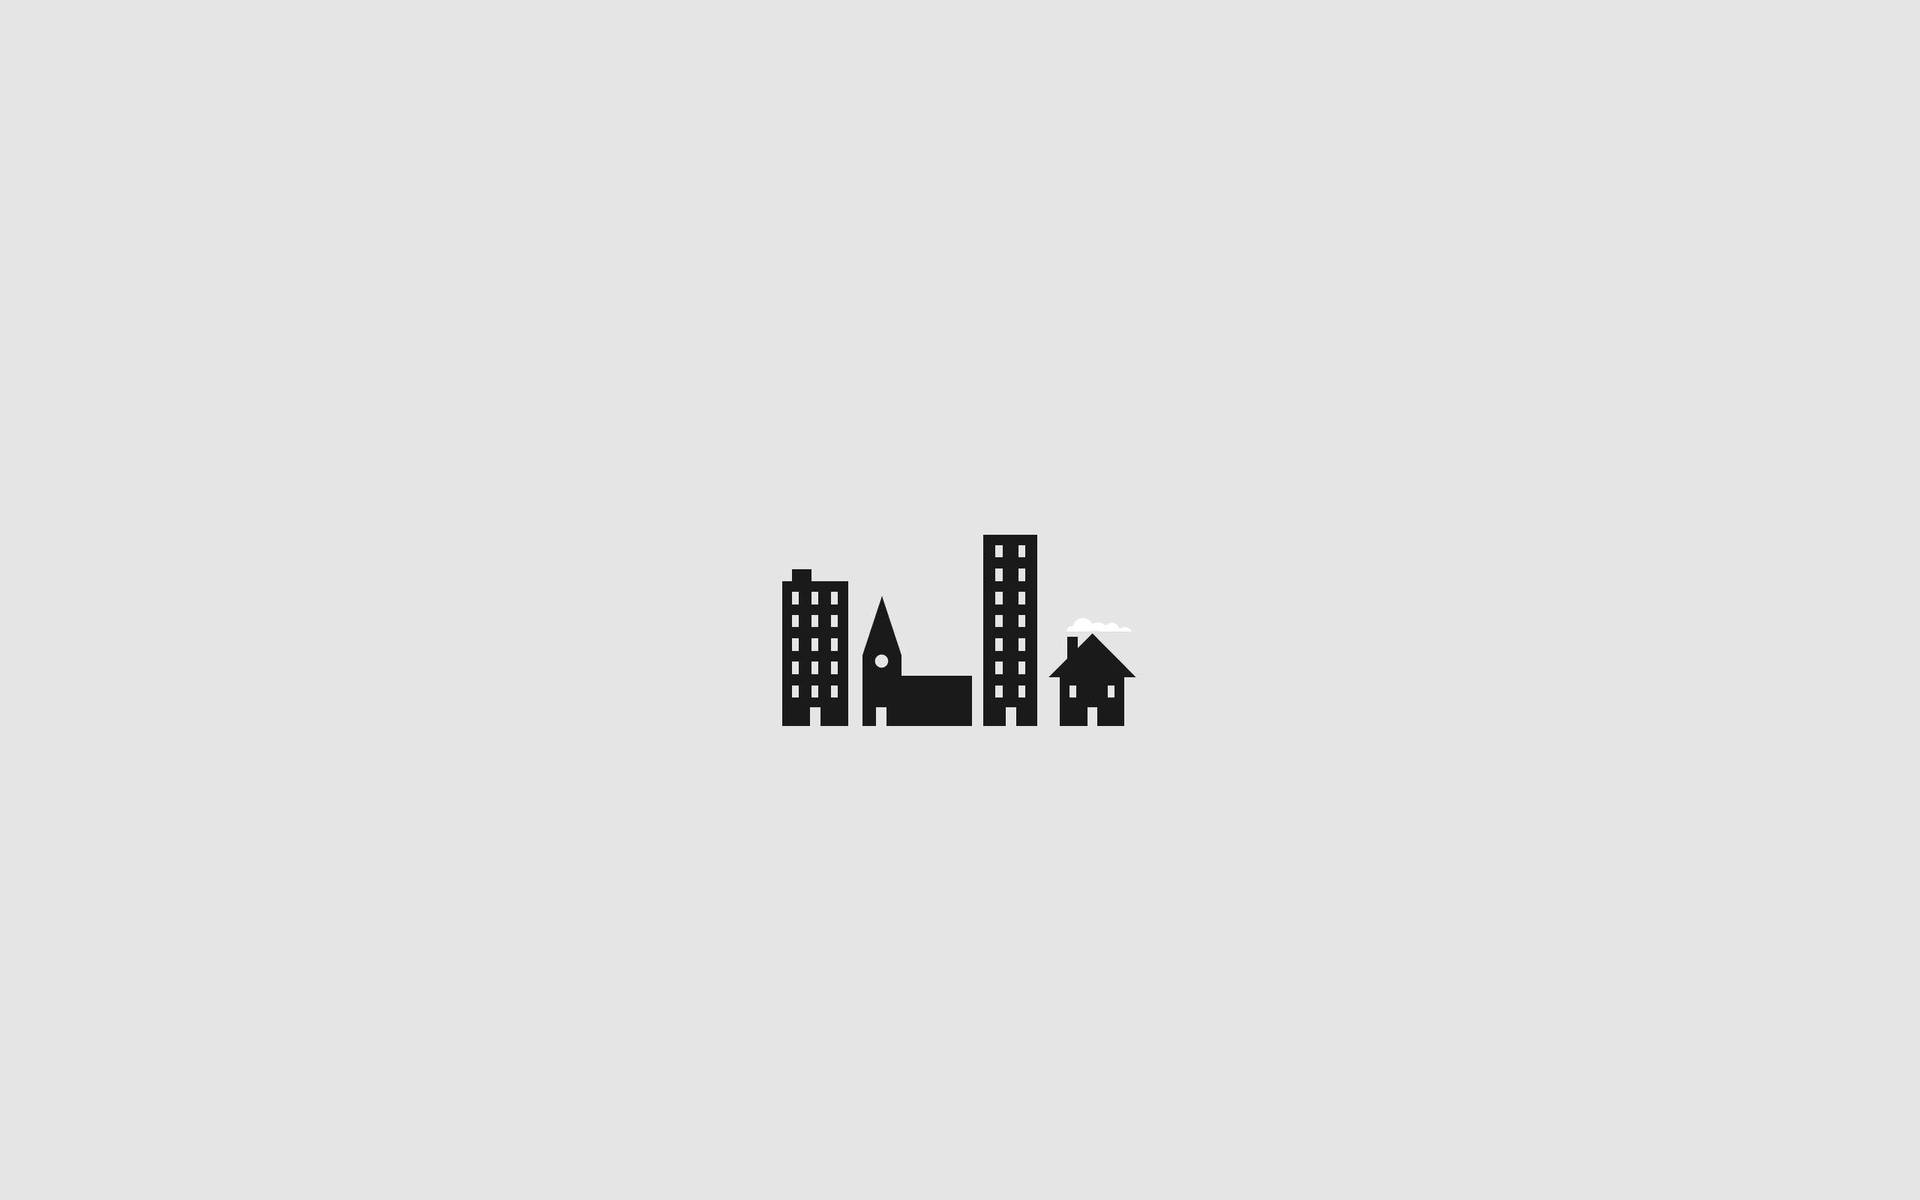 Buildings And House Minimal Aesthetic Desktop Background